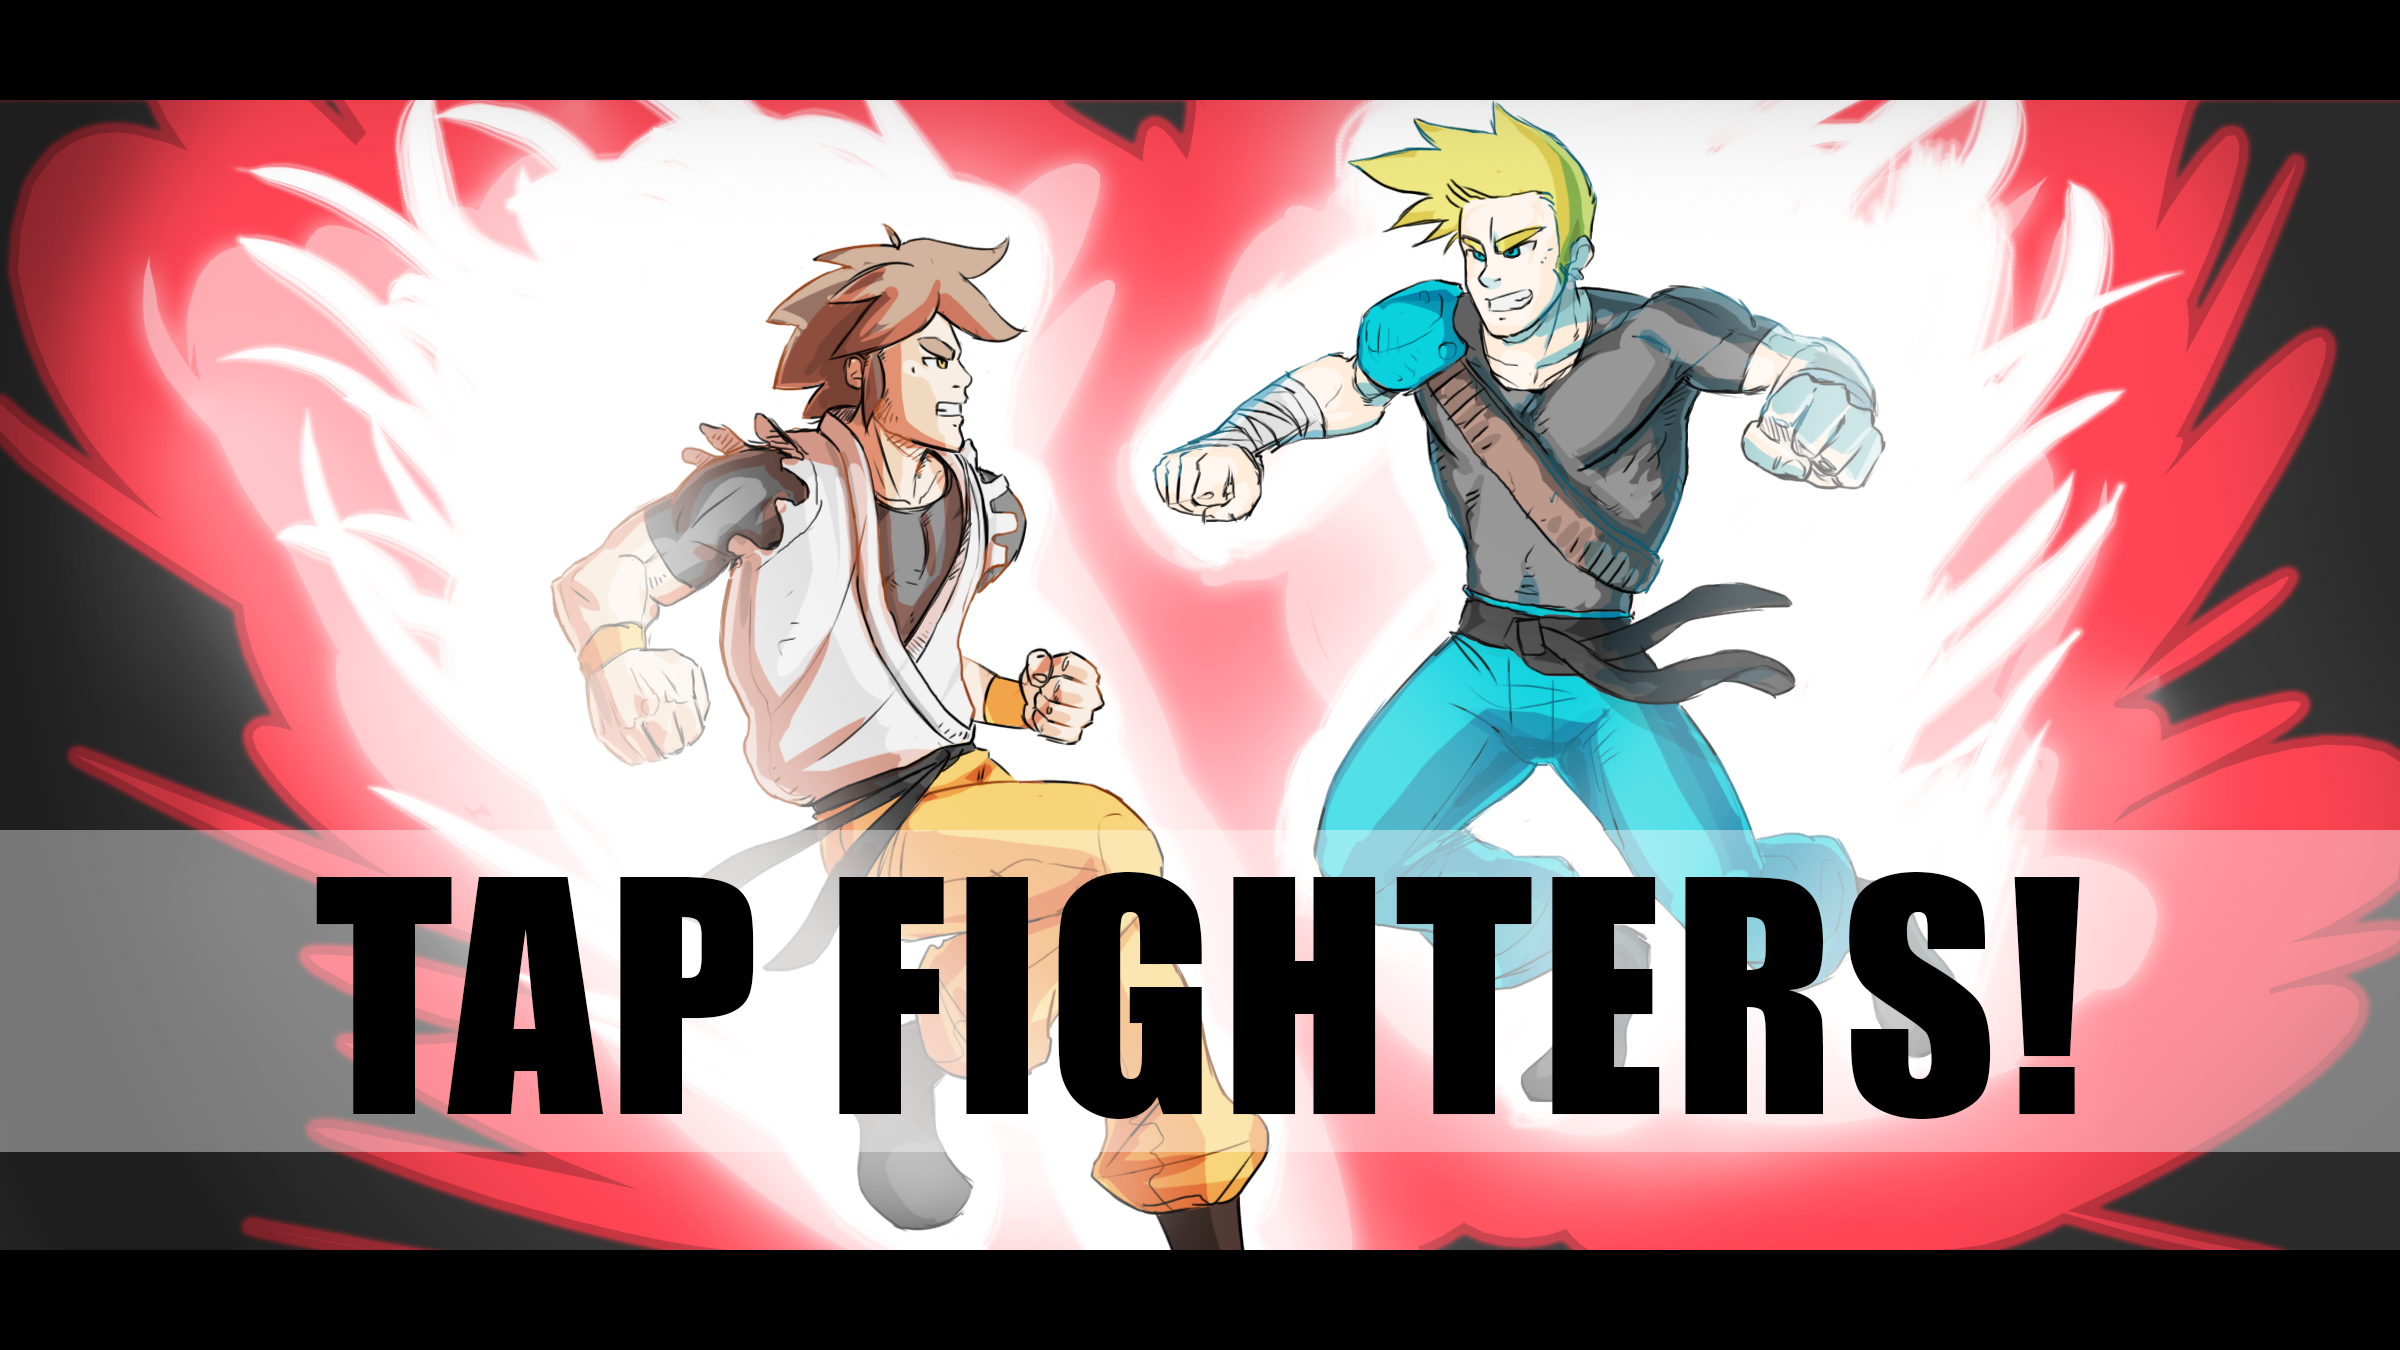 Tap Fighters - 2 playersのキャプチャ